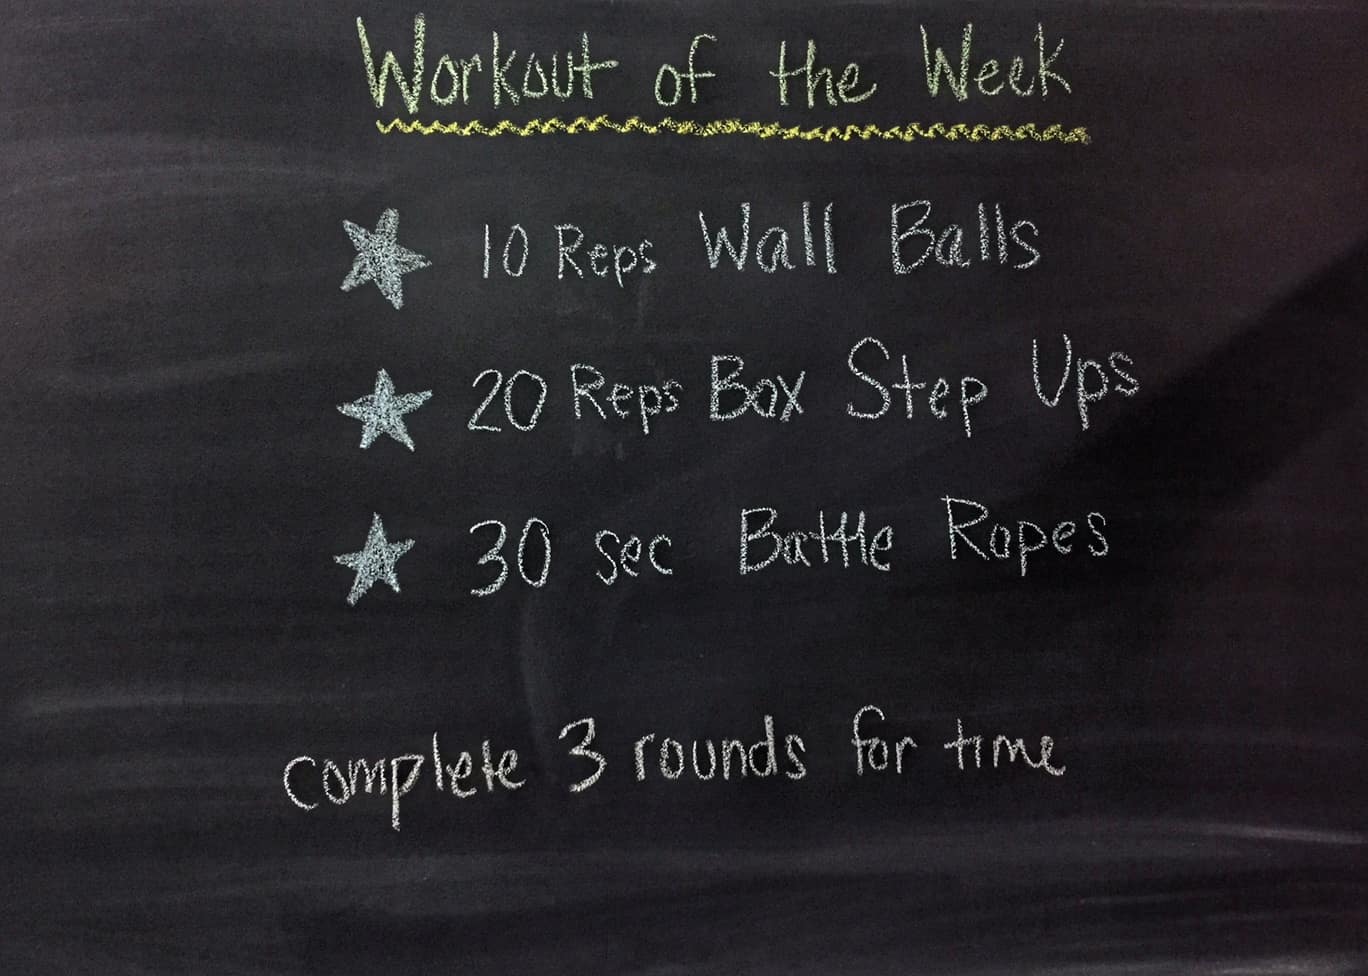 Workout of the Week at Anytime Fitness (June 4 2016)